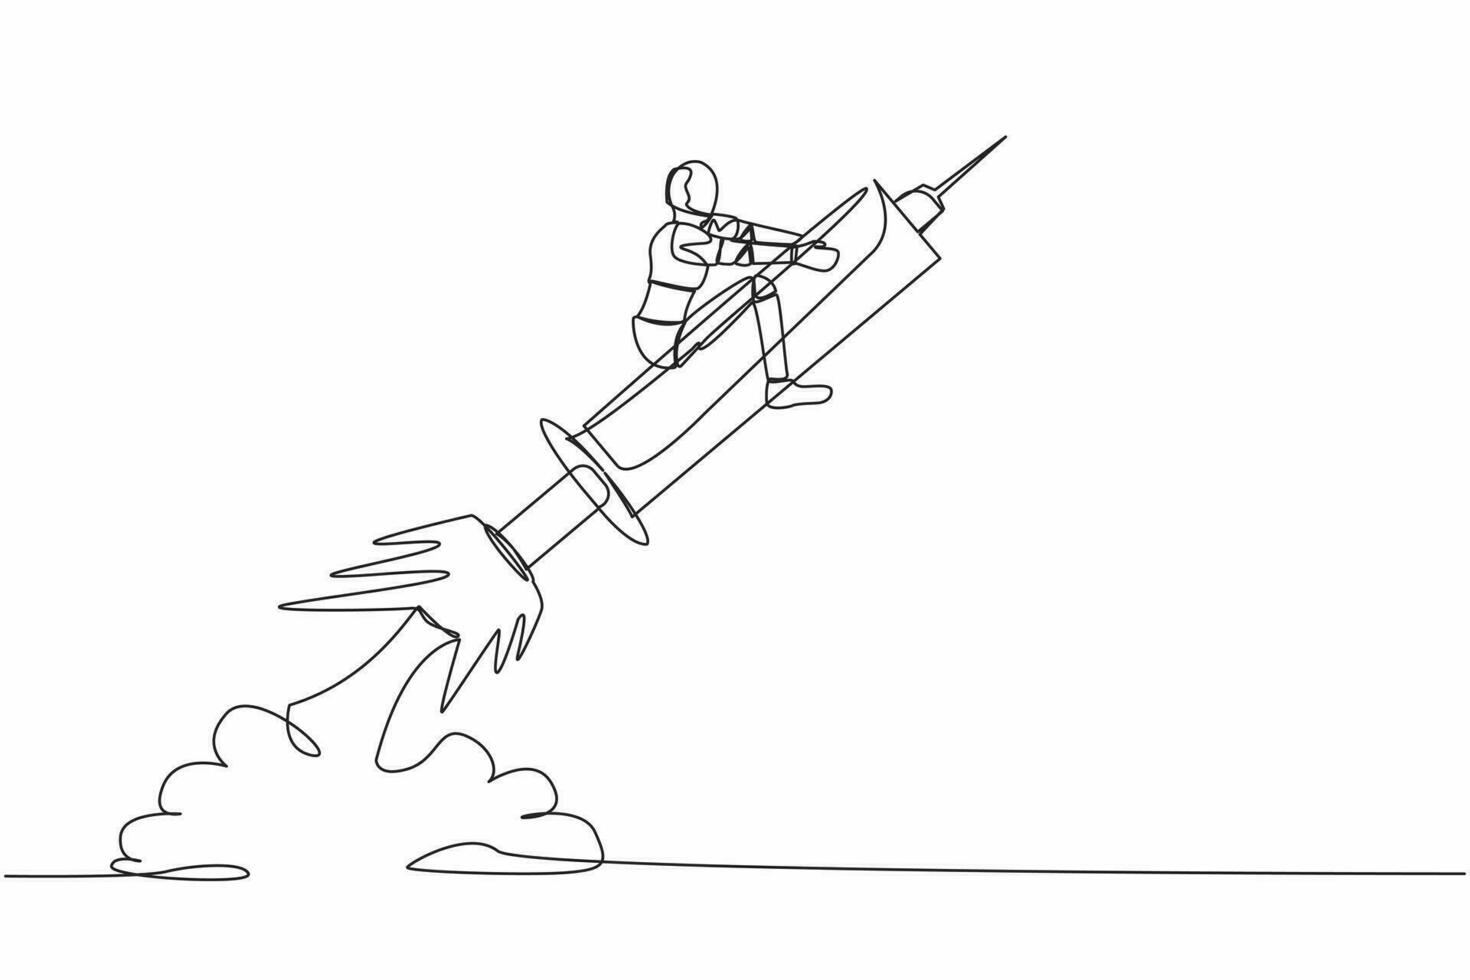 Continuous one line drawing robot riding syringe rocket flying in the sky. Boosting health with tech. Robot cybernetic organism. Future robotic development. Single line draw design vector illustration